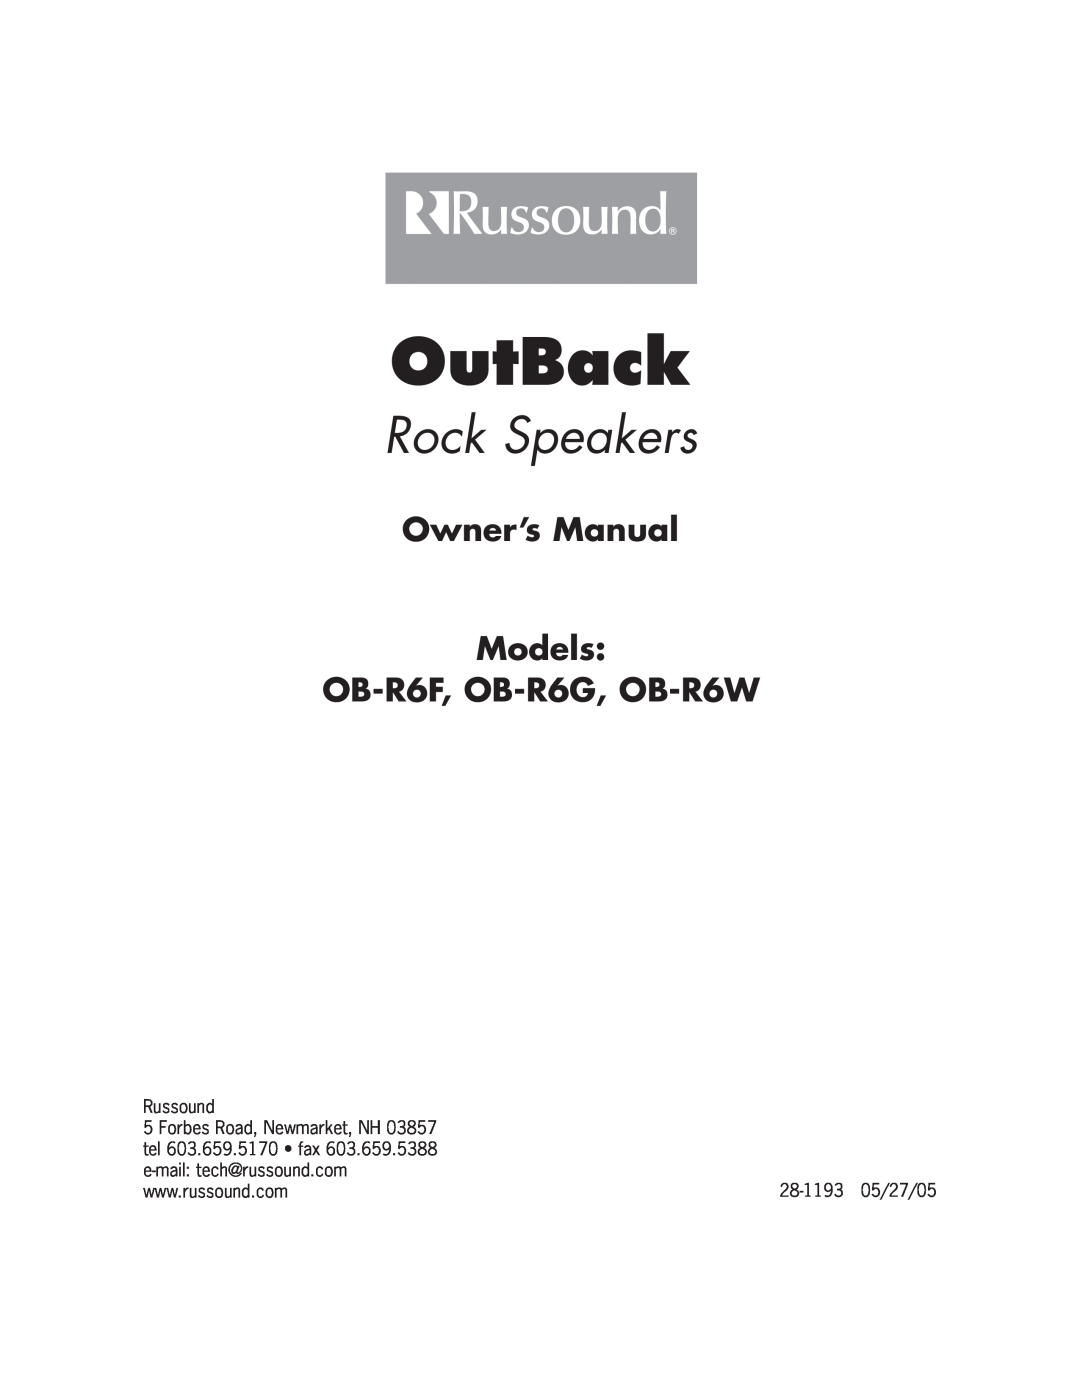 Russound Owner’s Manual Models OB-R6F, OB-R6G, OB-R6W, OutBack, Rock Speakers, Russound, Forbes Road, Newmarket, NH 